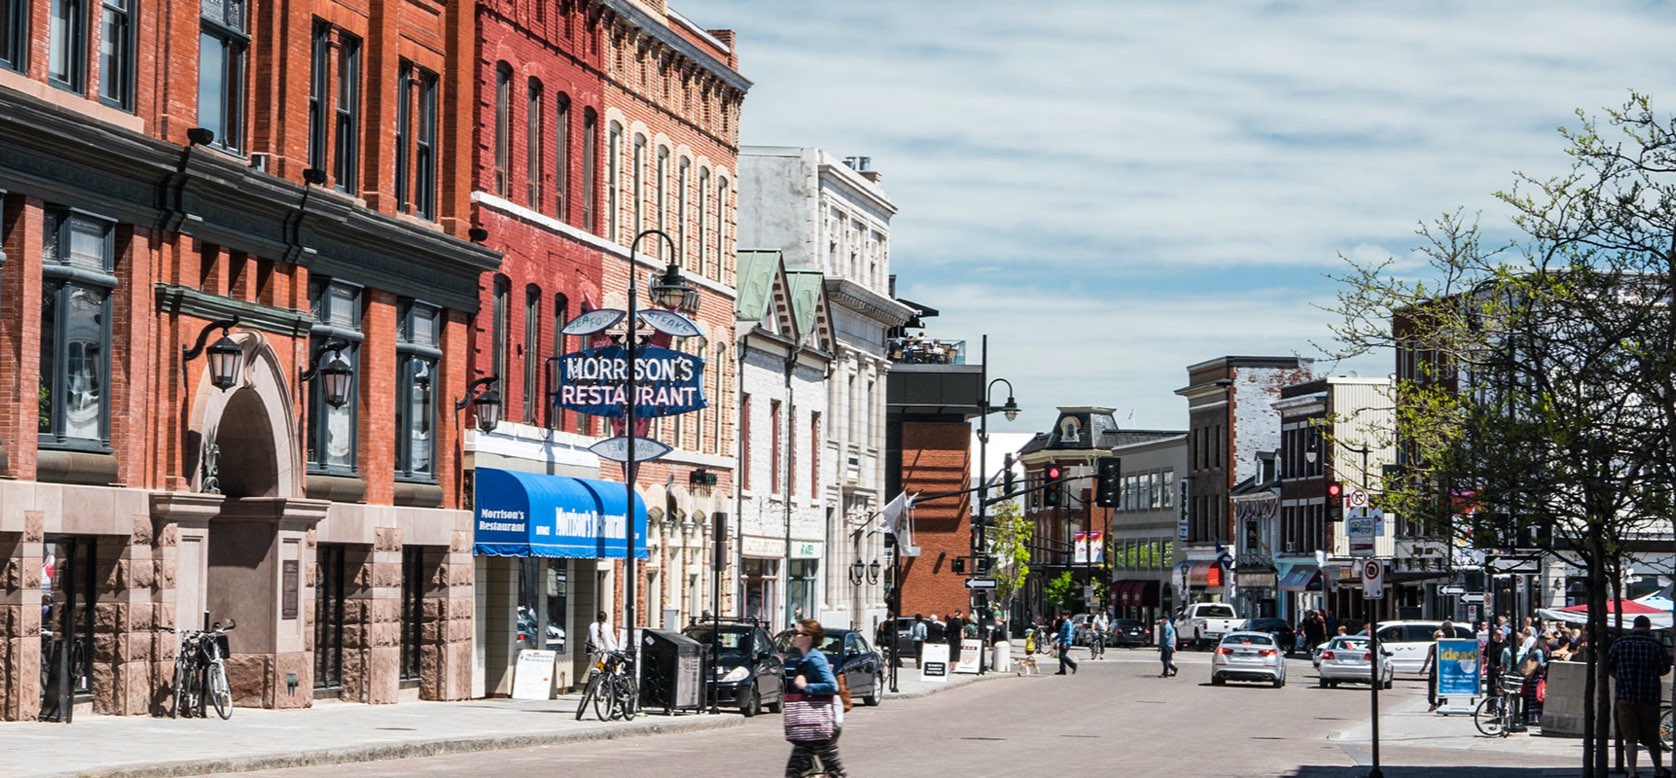 A steet view of downtown Kingston, featuring historic limestone buildings